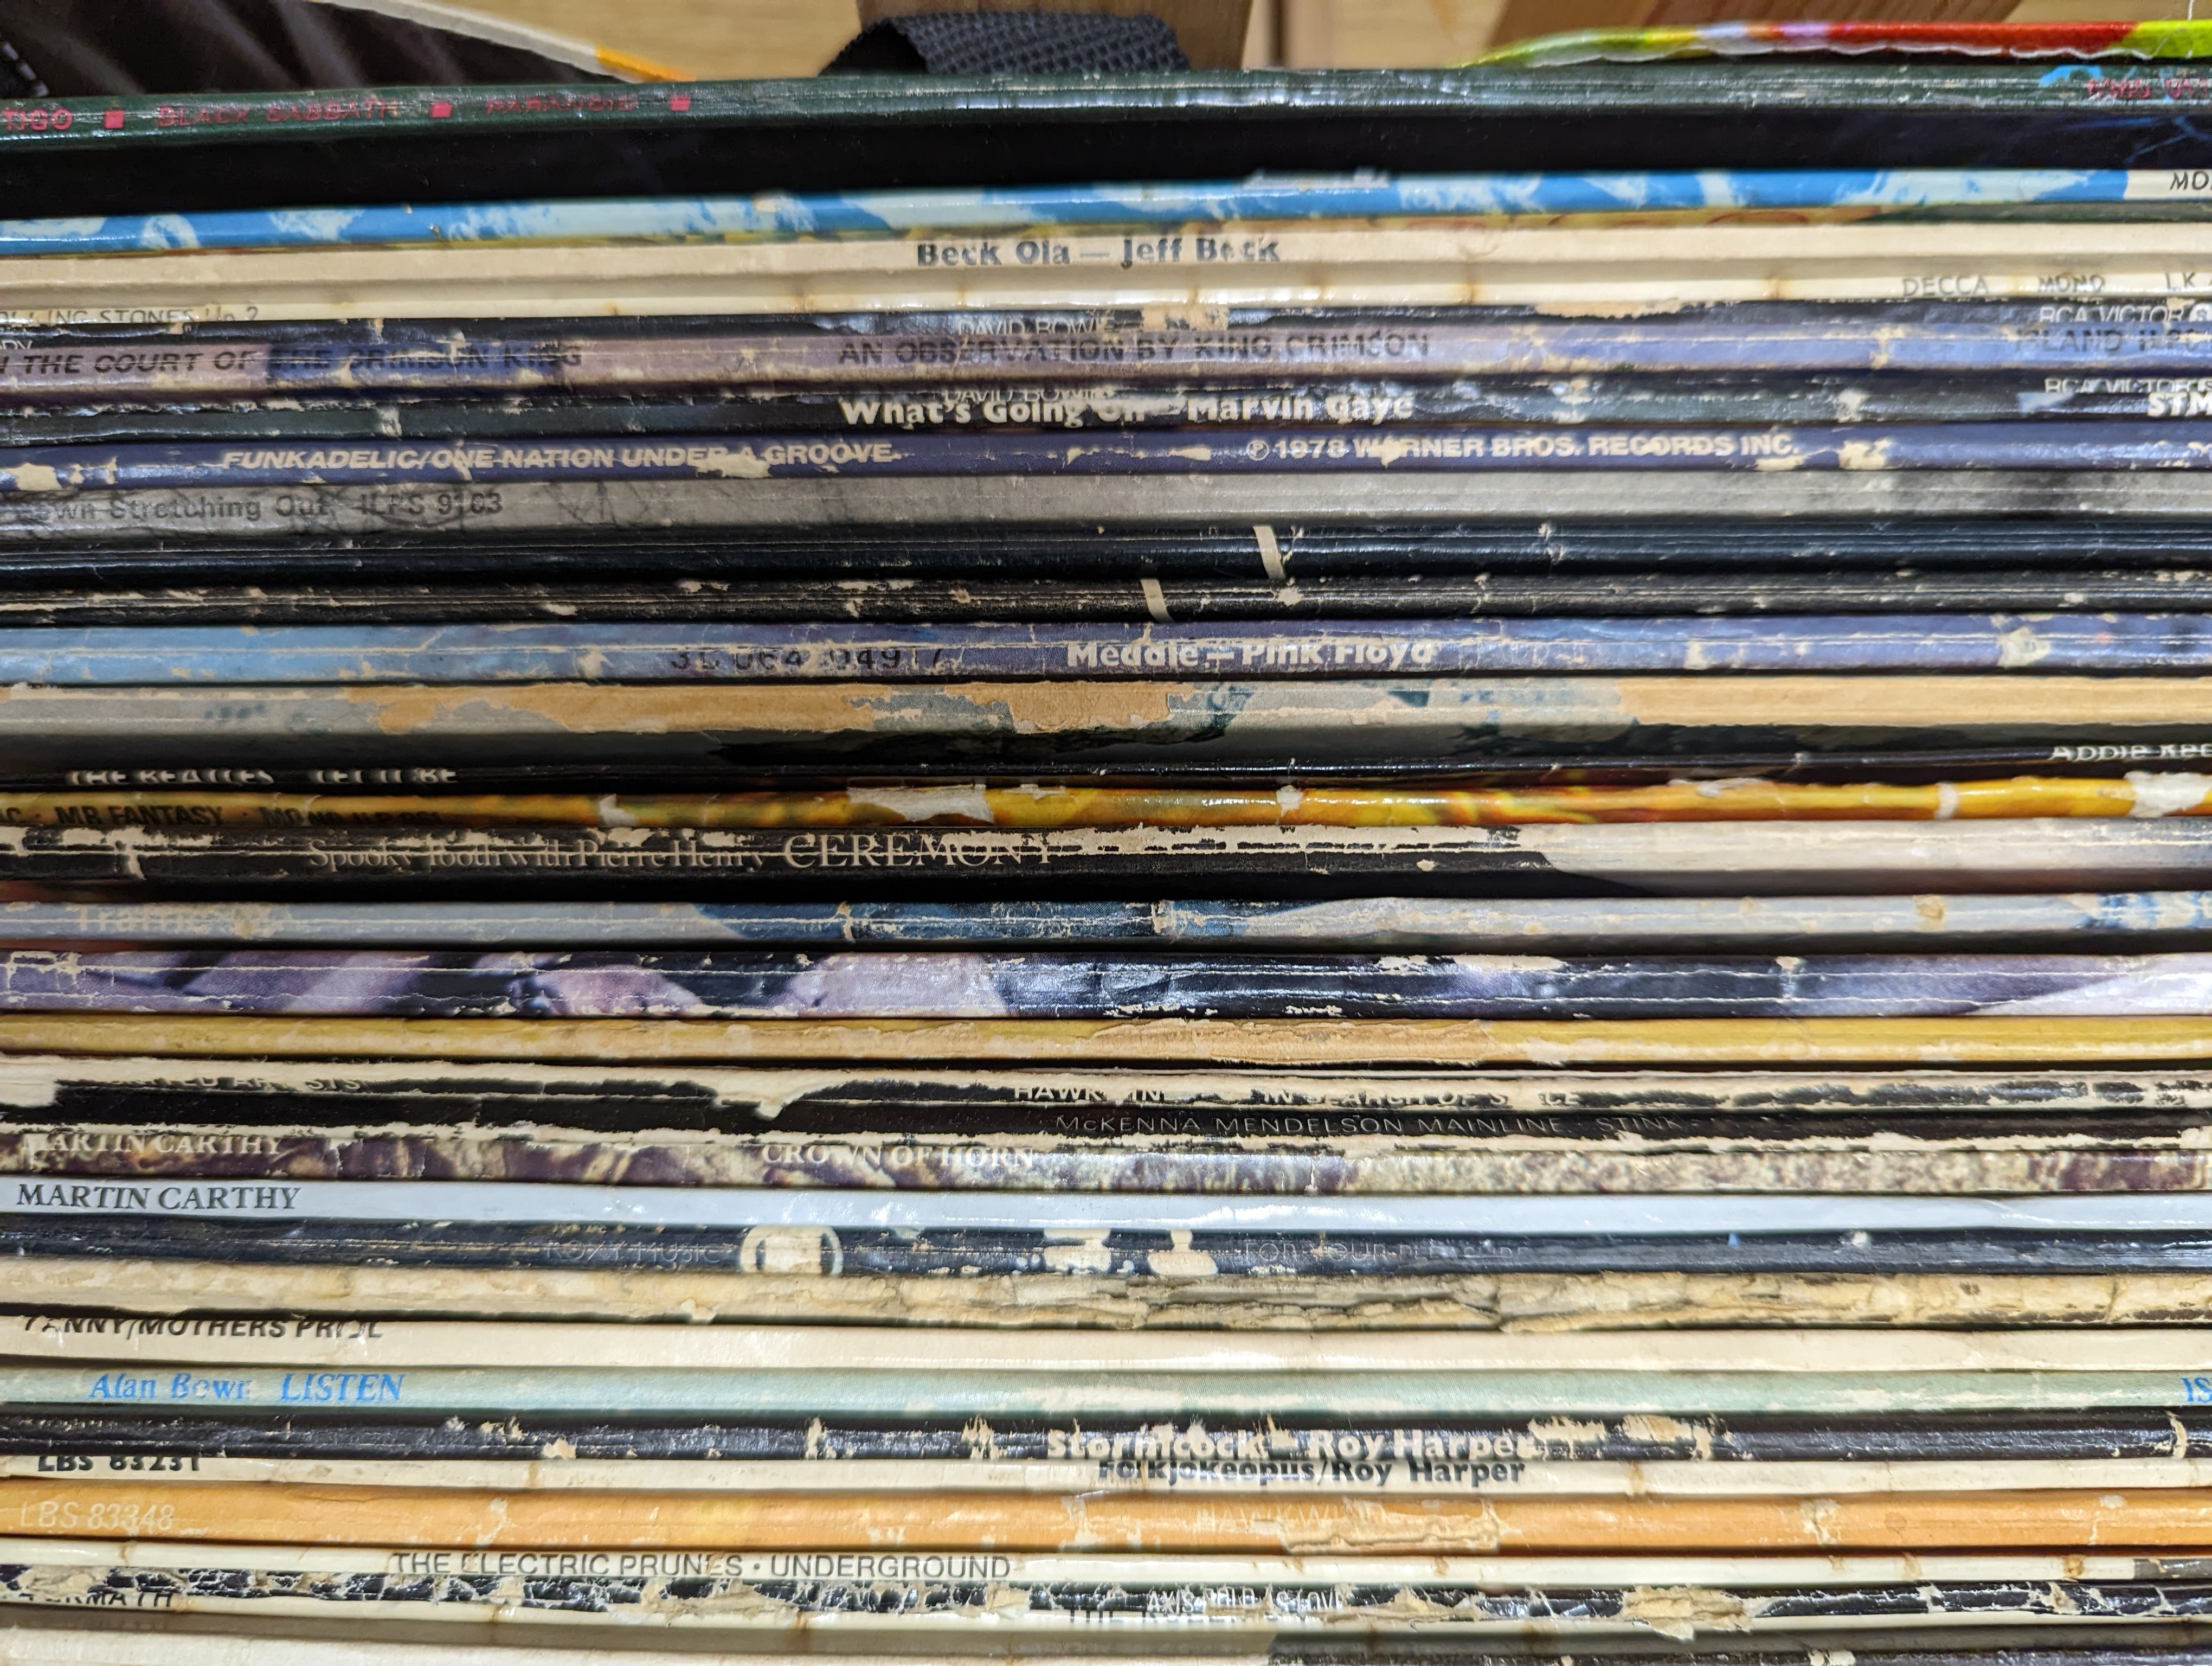 Mixed 1970's records, the Beatles, David Bowie, the Rolling Stones, Pink Floyd, Led Zeppelin etc.